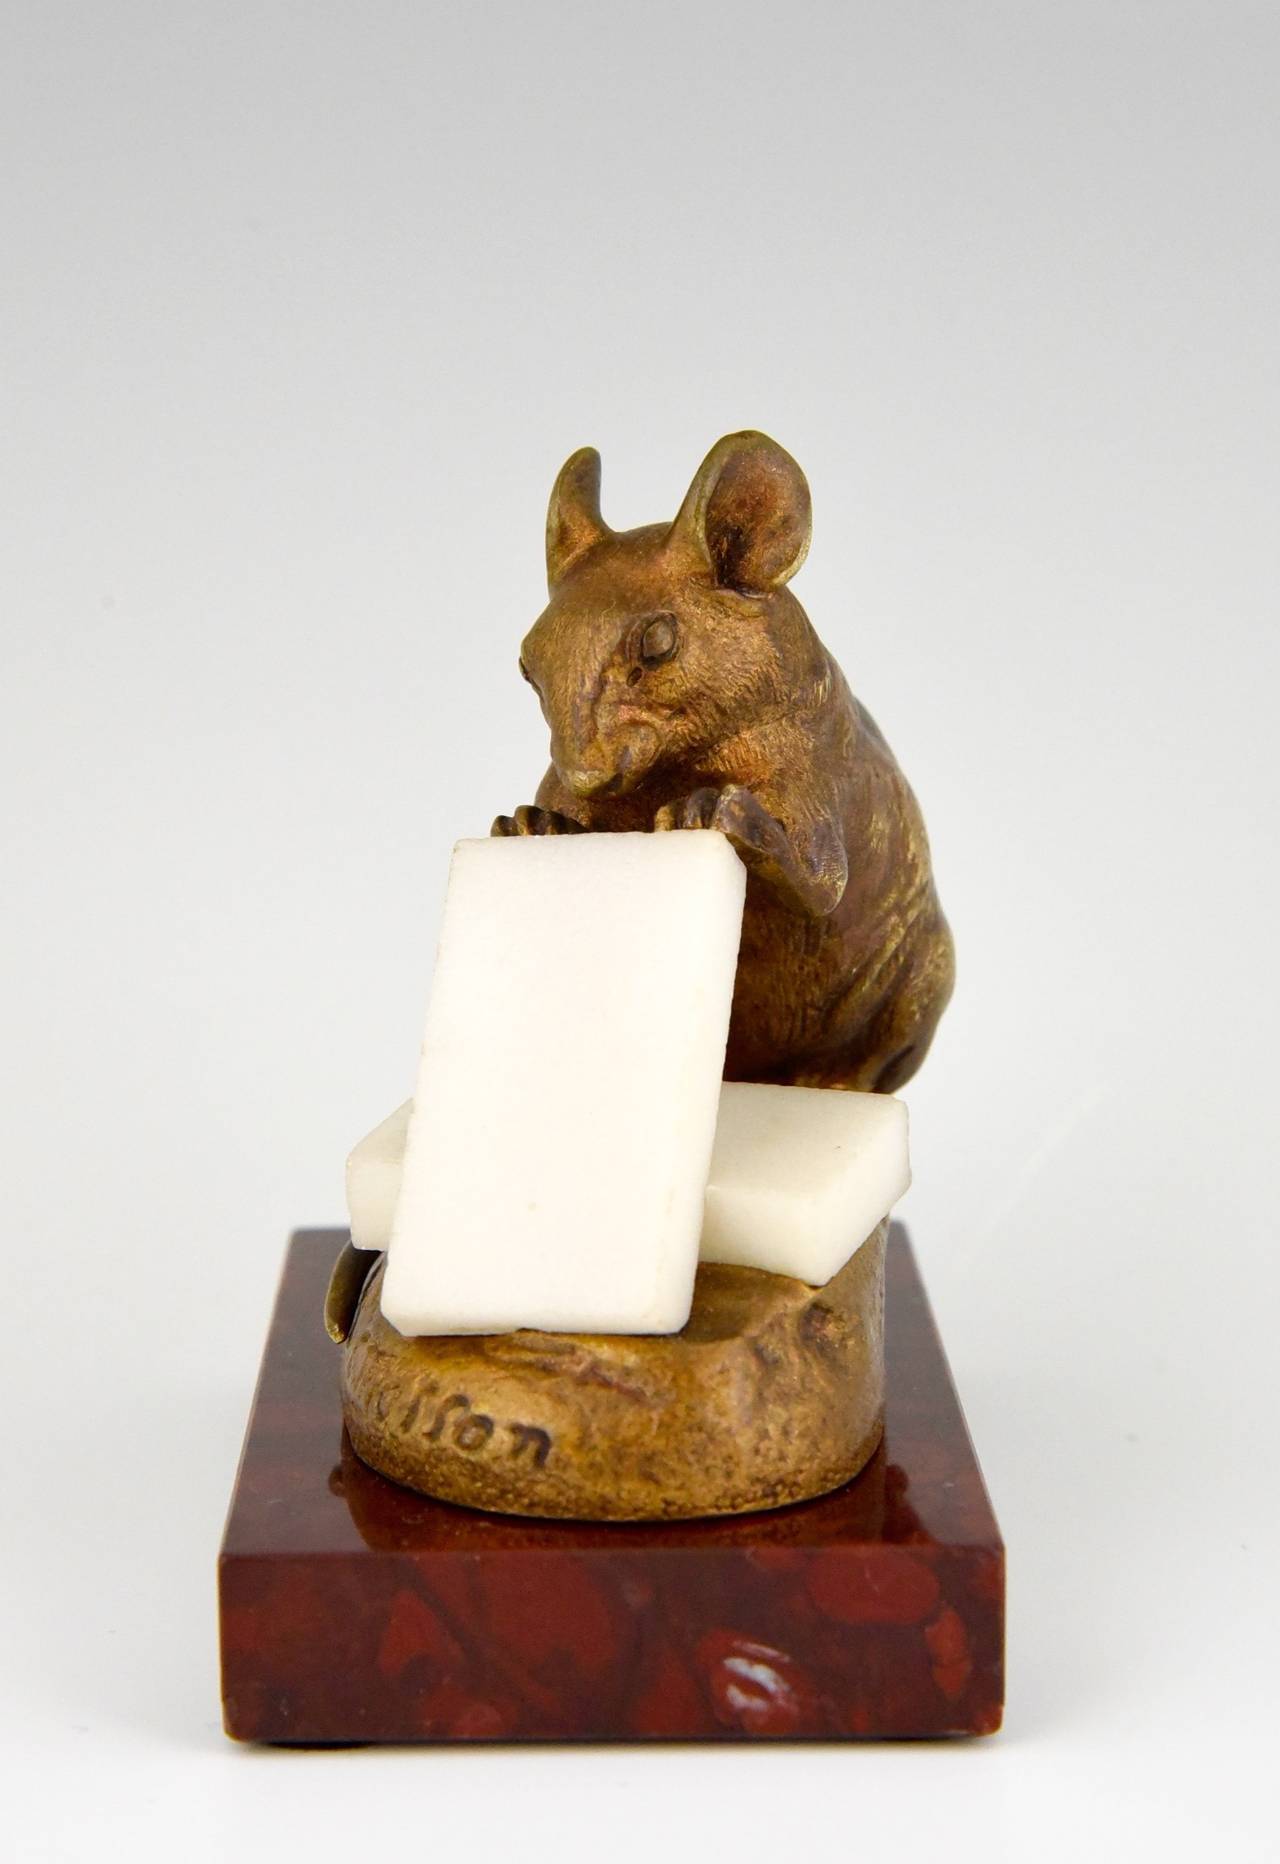 French Antique Bronze Sculpture of a Mouse with Cheese by Clovis Masson 1880